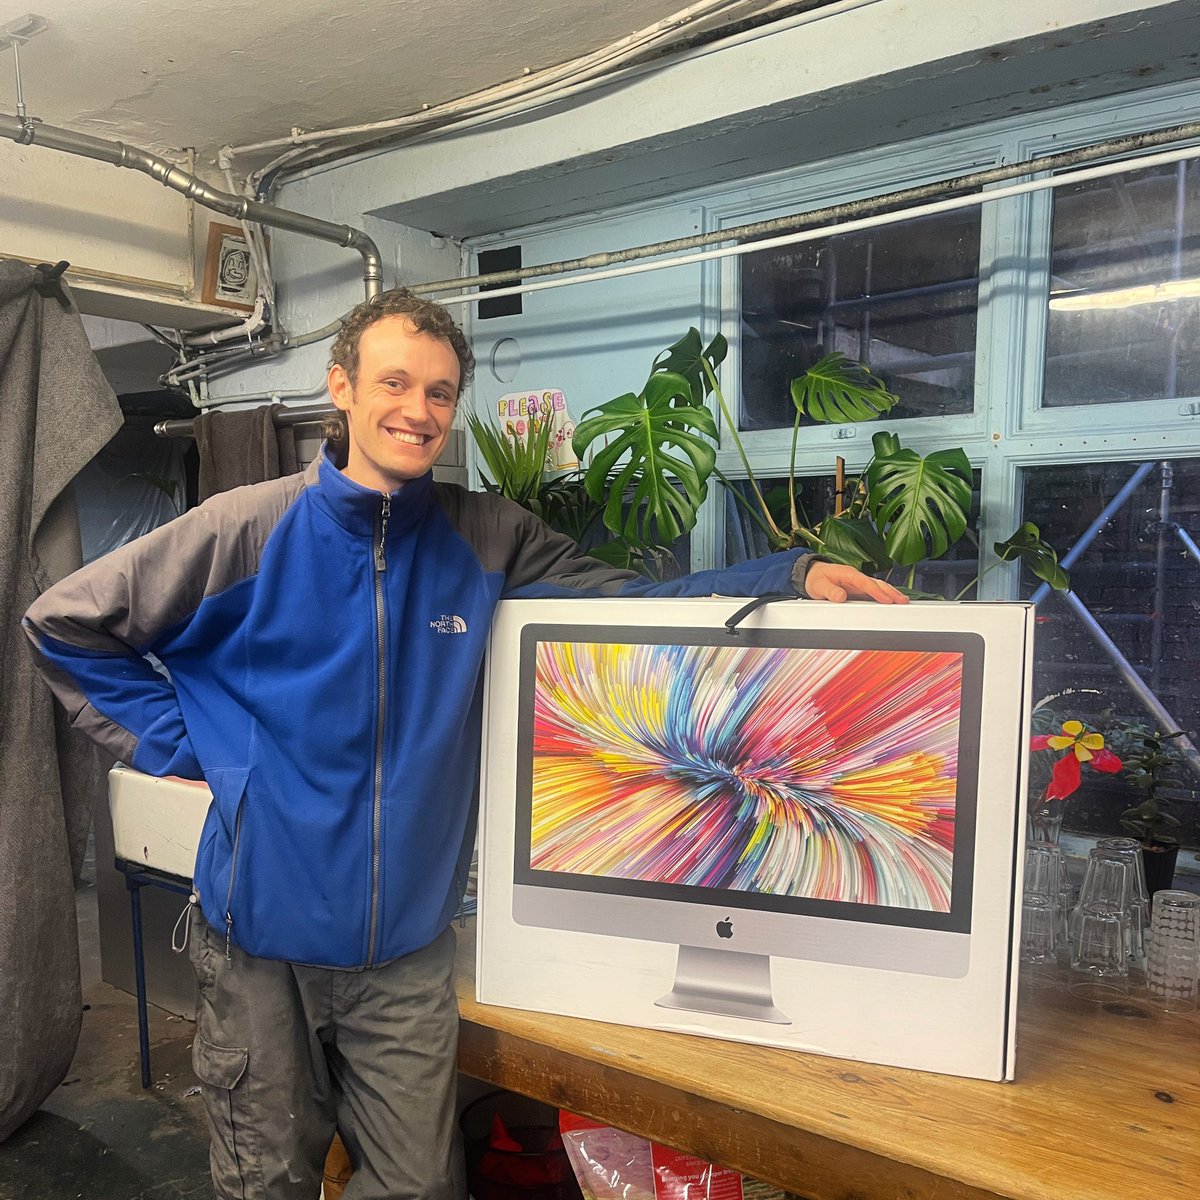 Massive thank you to @DreamingFish for donating this iMac to MAP Charity 😍 🖥️

The iMac will be homed in MAP Charity’s coworking space and will be used by artists that are working with MAP’s young people ❤️